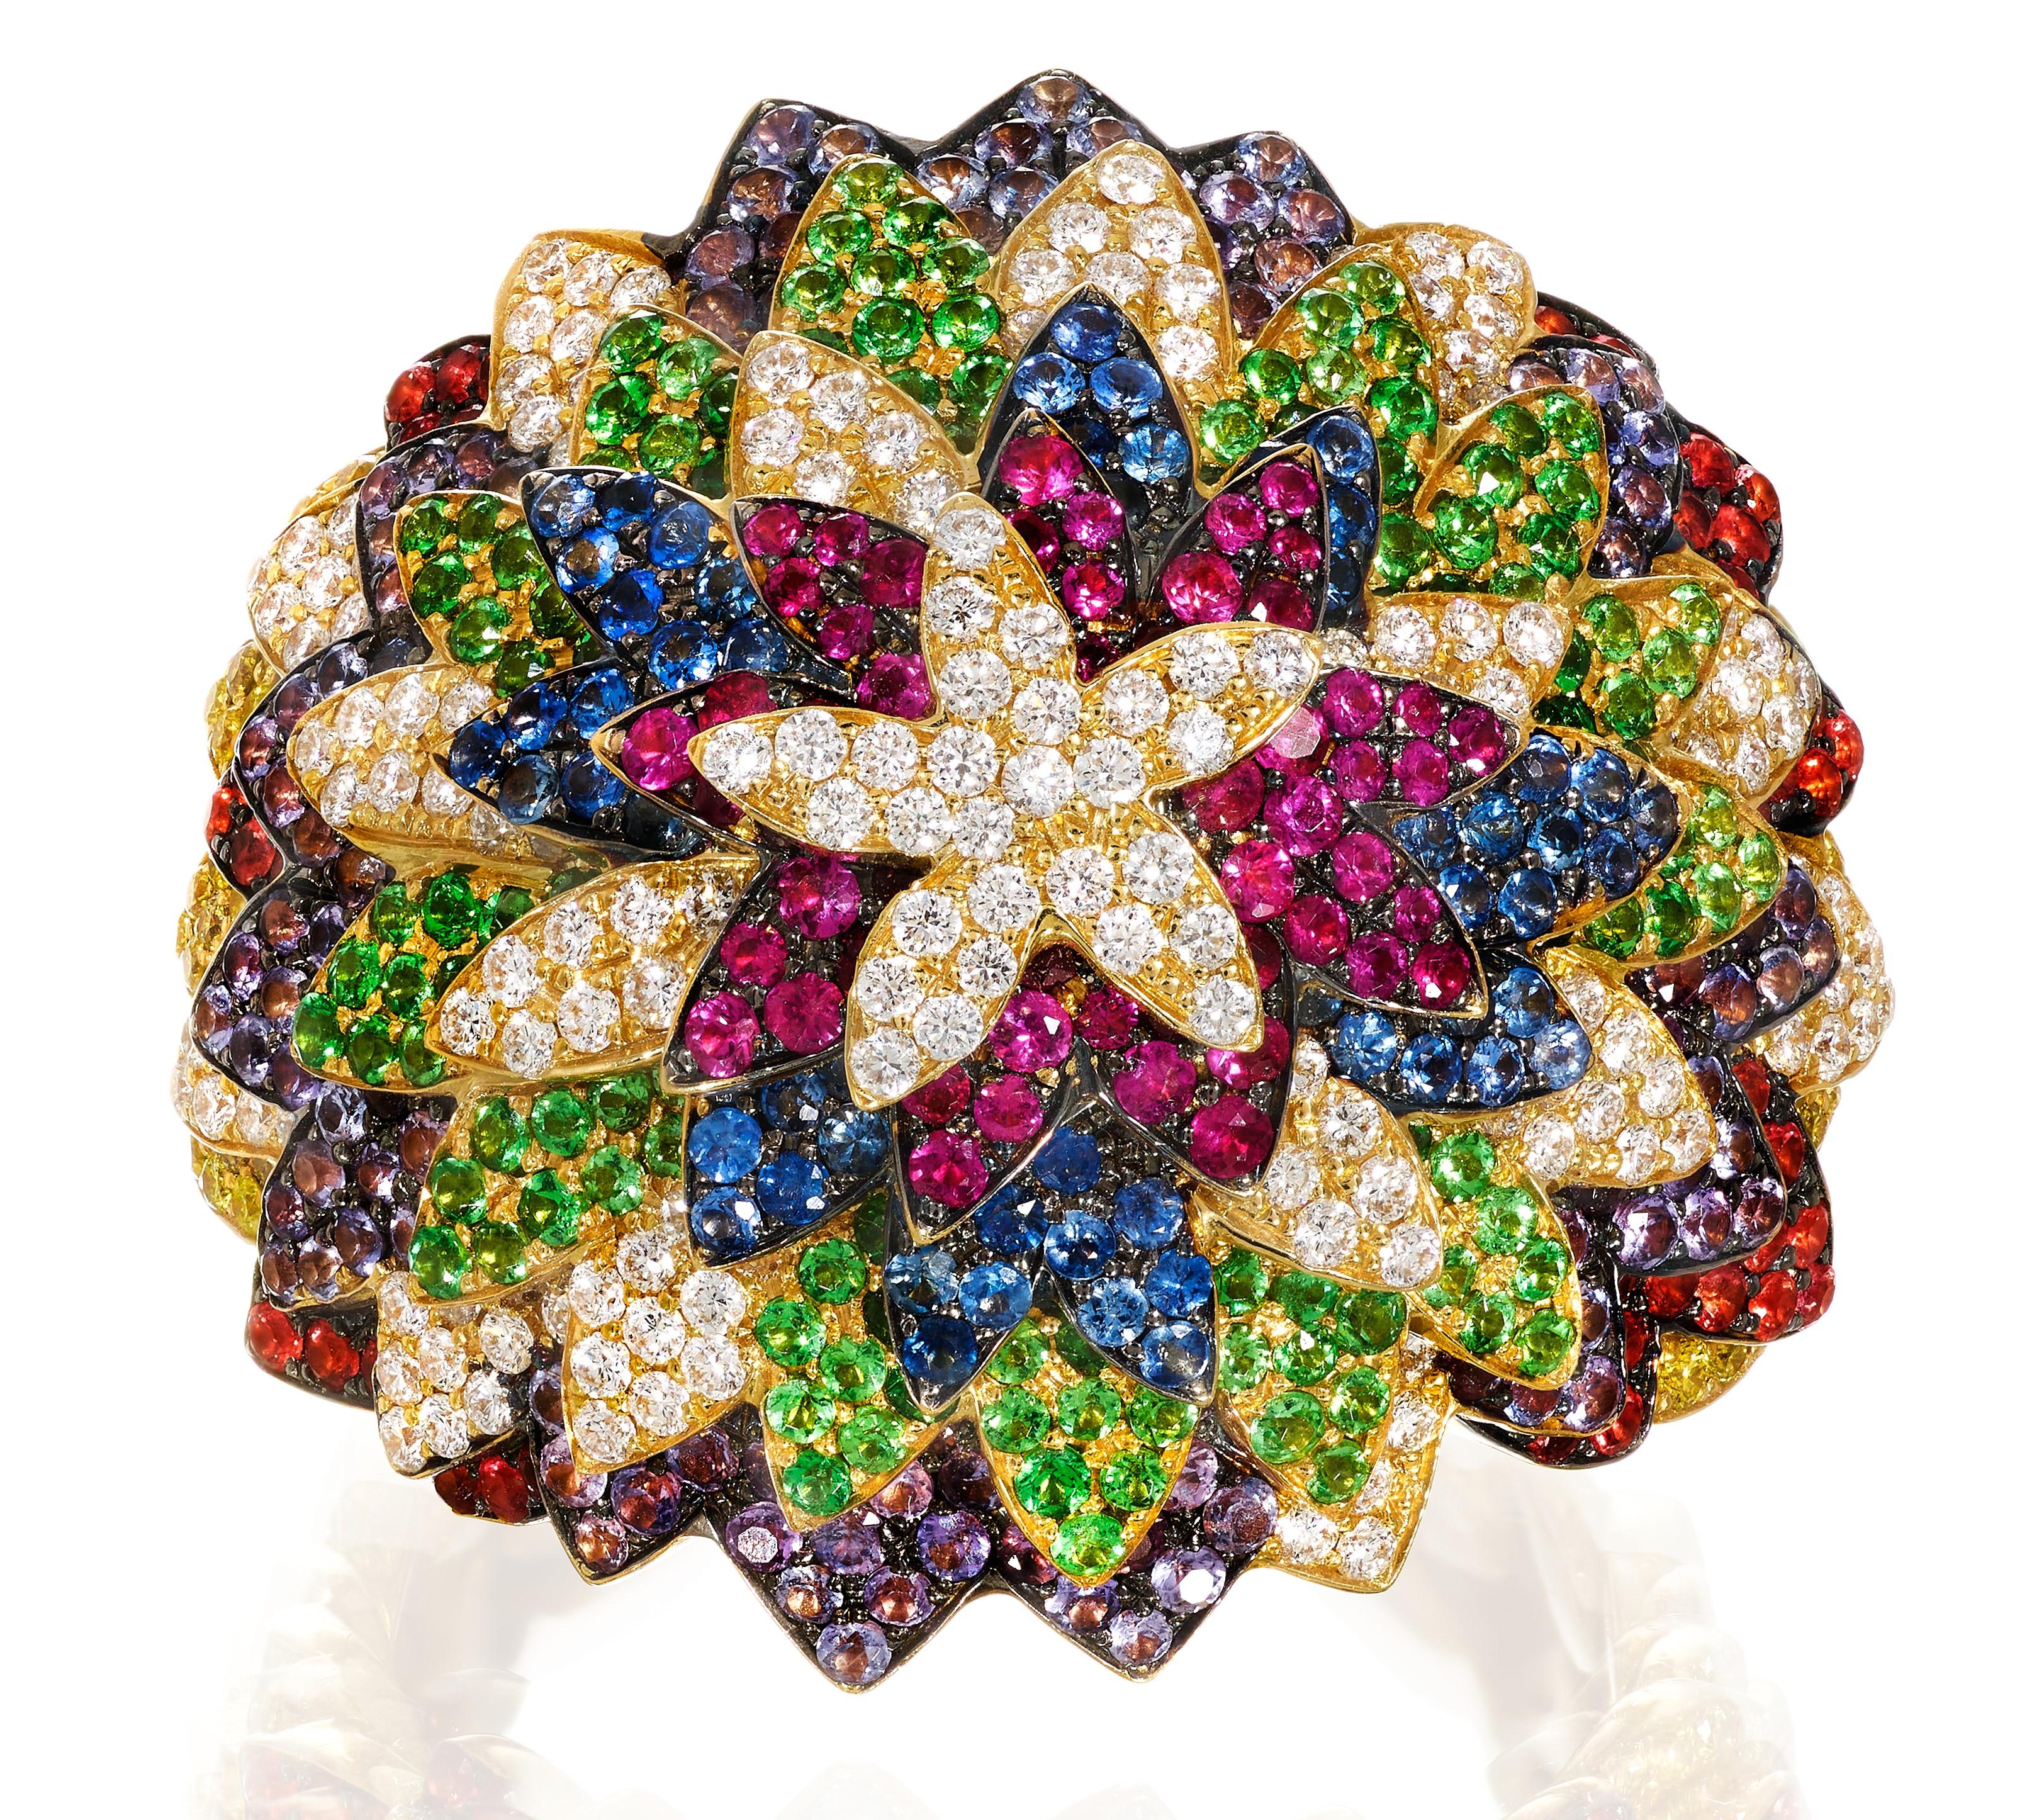 Rosior Contemporary Cocktail Ring set in 19.2 Karat Yellow Gold with:
- 175 White (F Color, VVS Clarity) Diamonds with 0,75 ct,
- 62 Yellow Diamonds with 0,24 ct,
- 64 Rubis with 0,39 ct,
- 44 Orange Sapphires with 0,32 ct,
- 122 Purple Sapphires